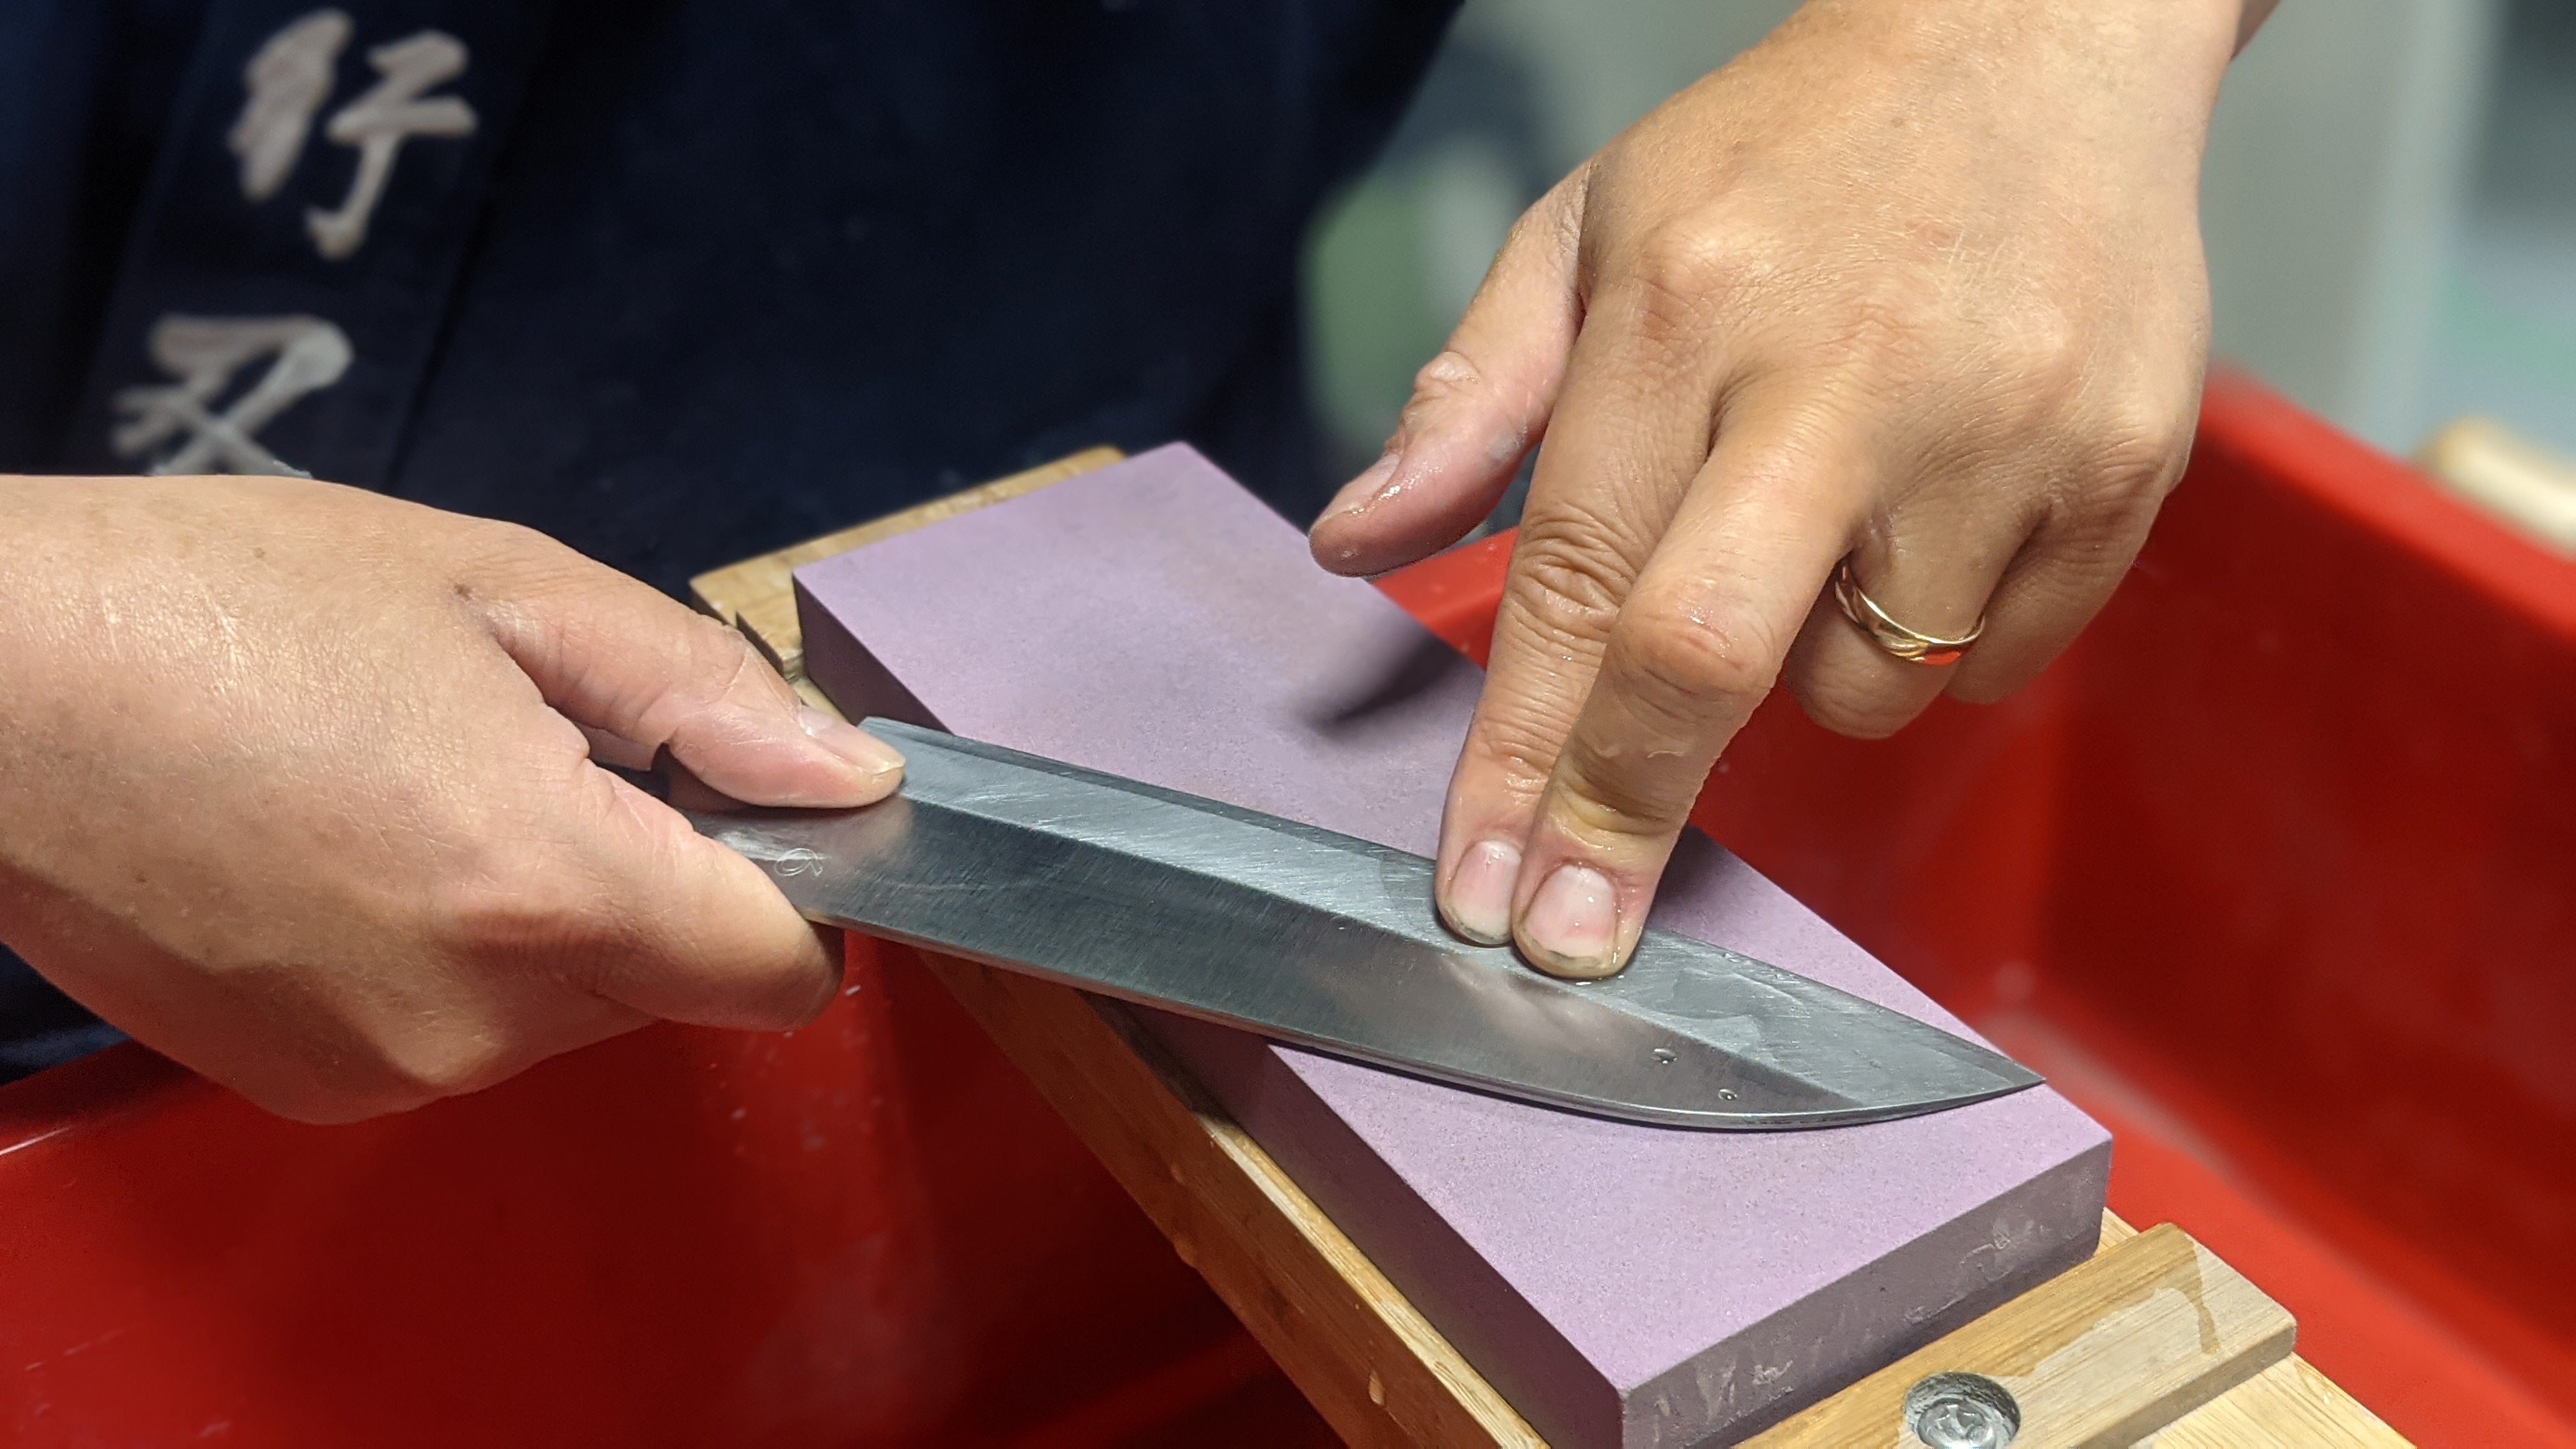 The Ultimate Guide to Sharpening Japanese Knives